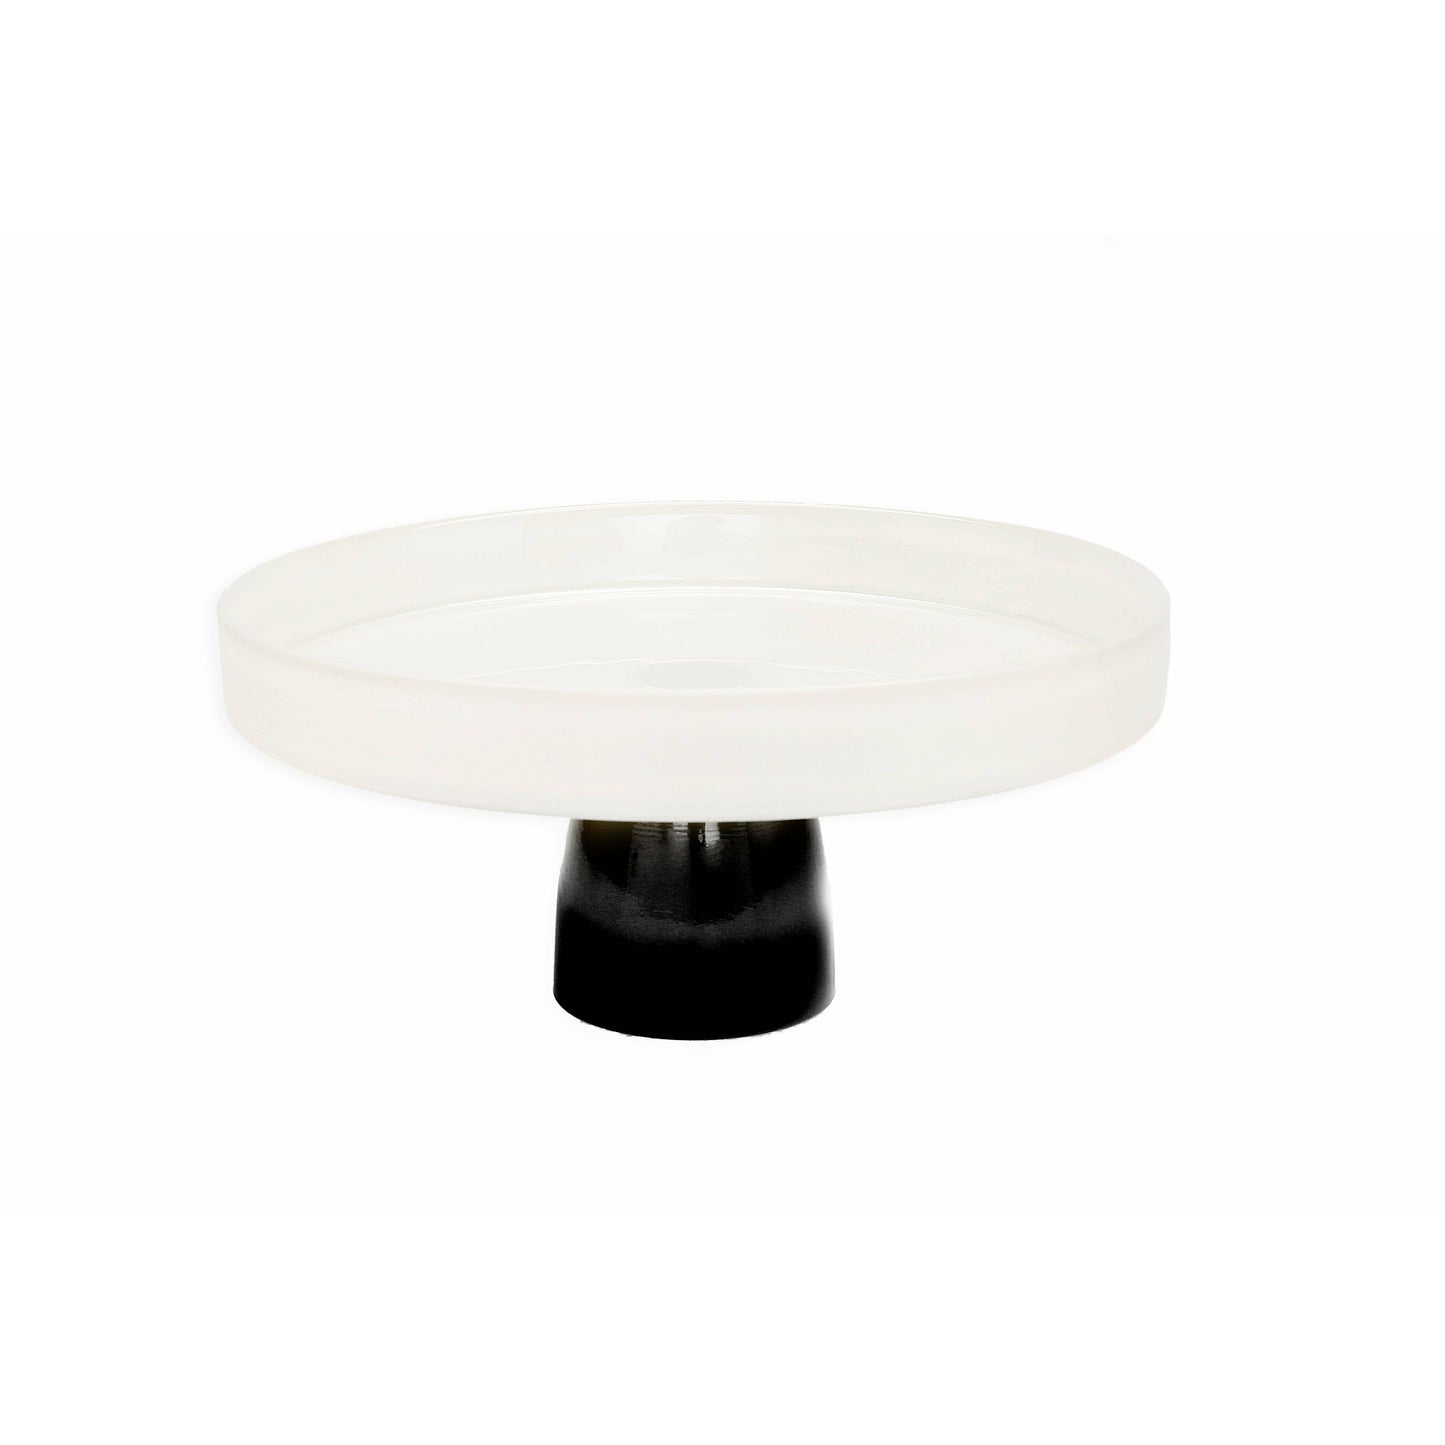 White Glass Cake Plate on Black Stem - Curated Home Decor